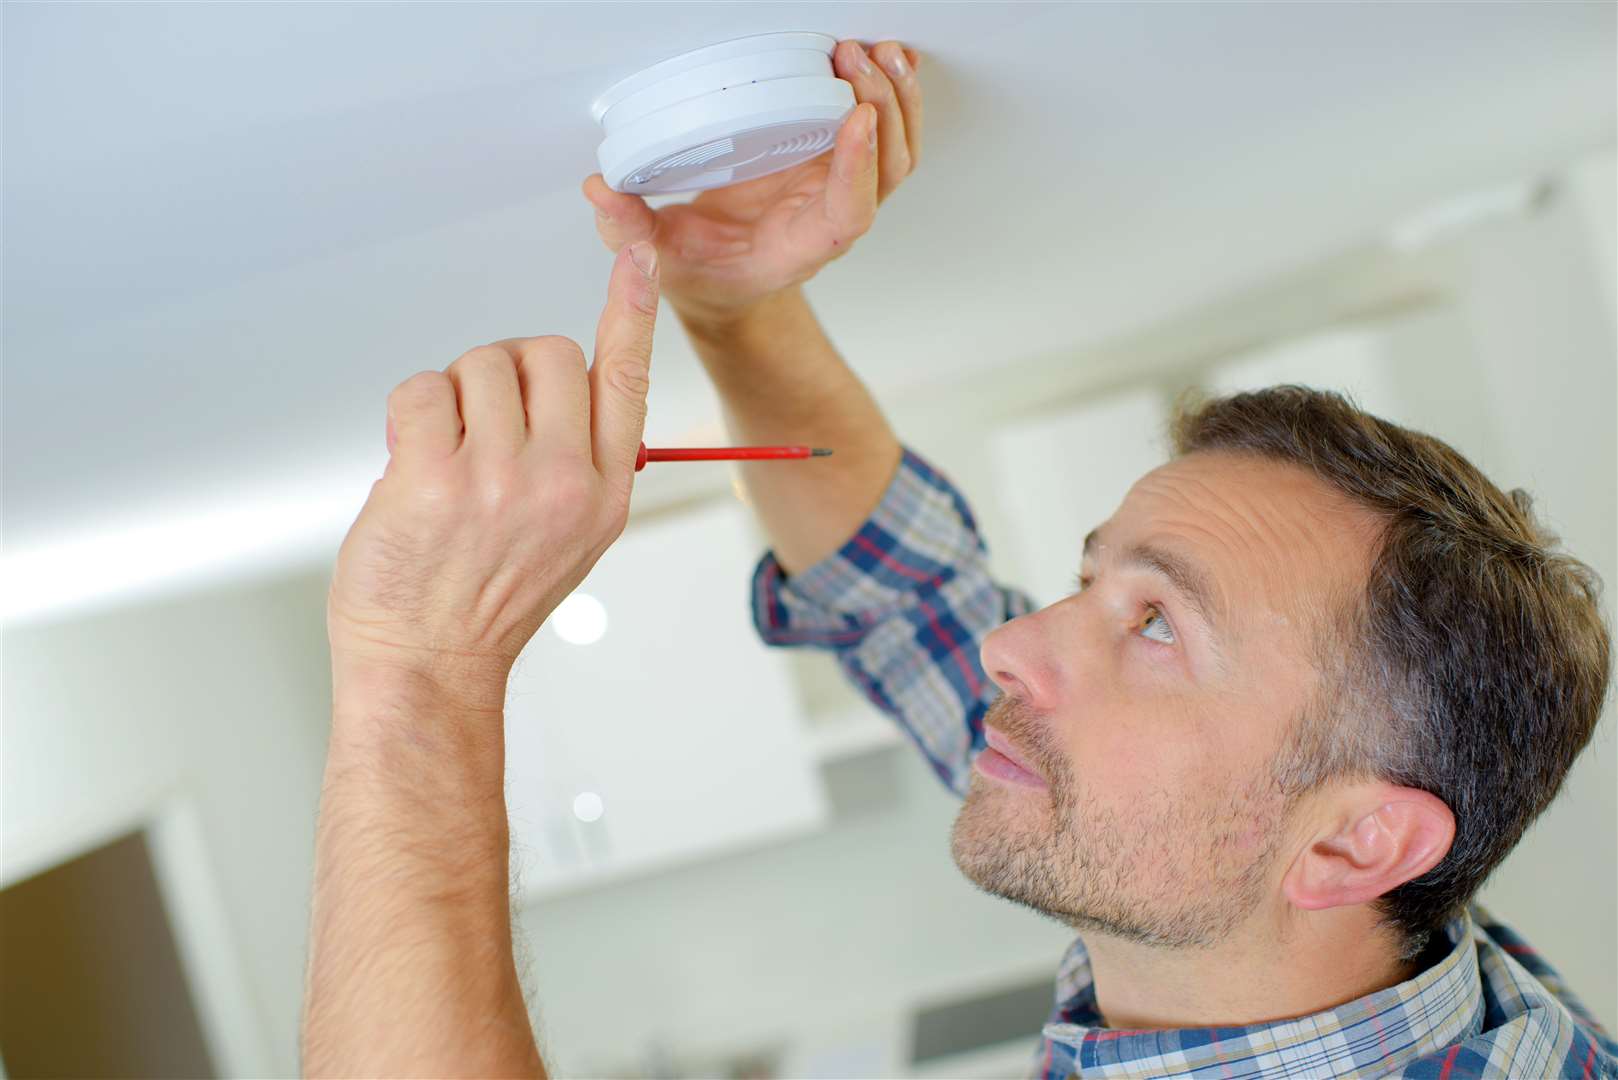 The rules would mean interlinked smoke alarms would need to be fitted in all homes in Scotland.